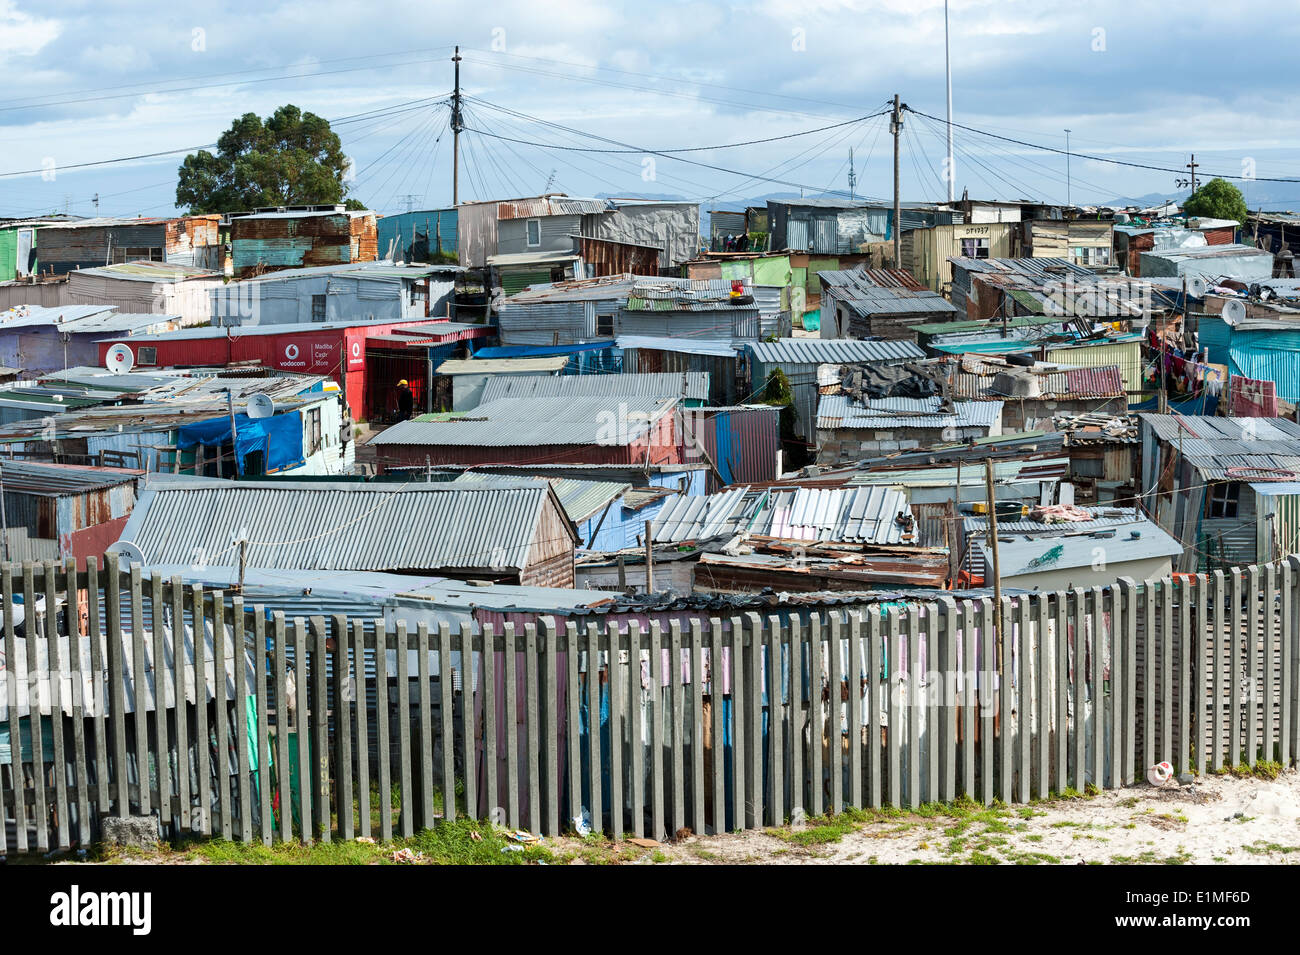 Corrugated iron sheds behind a fence in Khayelitsha, Cape Town, South Africa Stock Photo